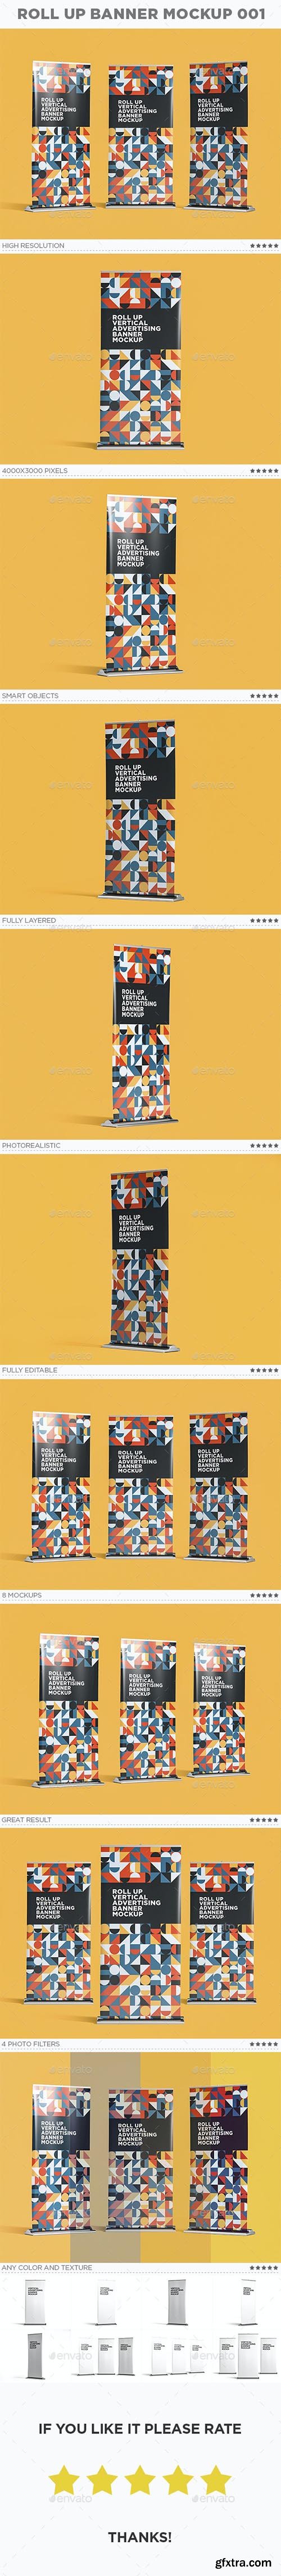 GraphicRiver - Roll Up Vertical Advertising Banner Mockup 001 27533574